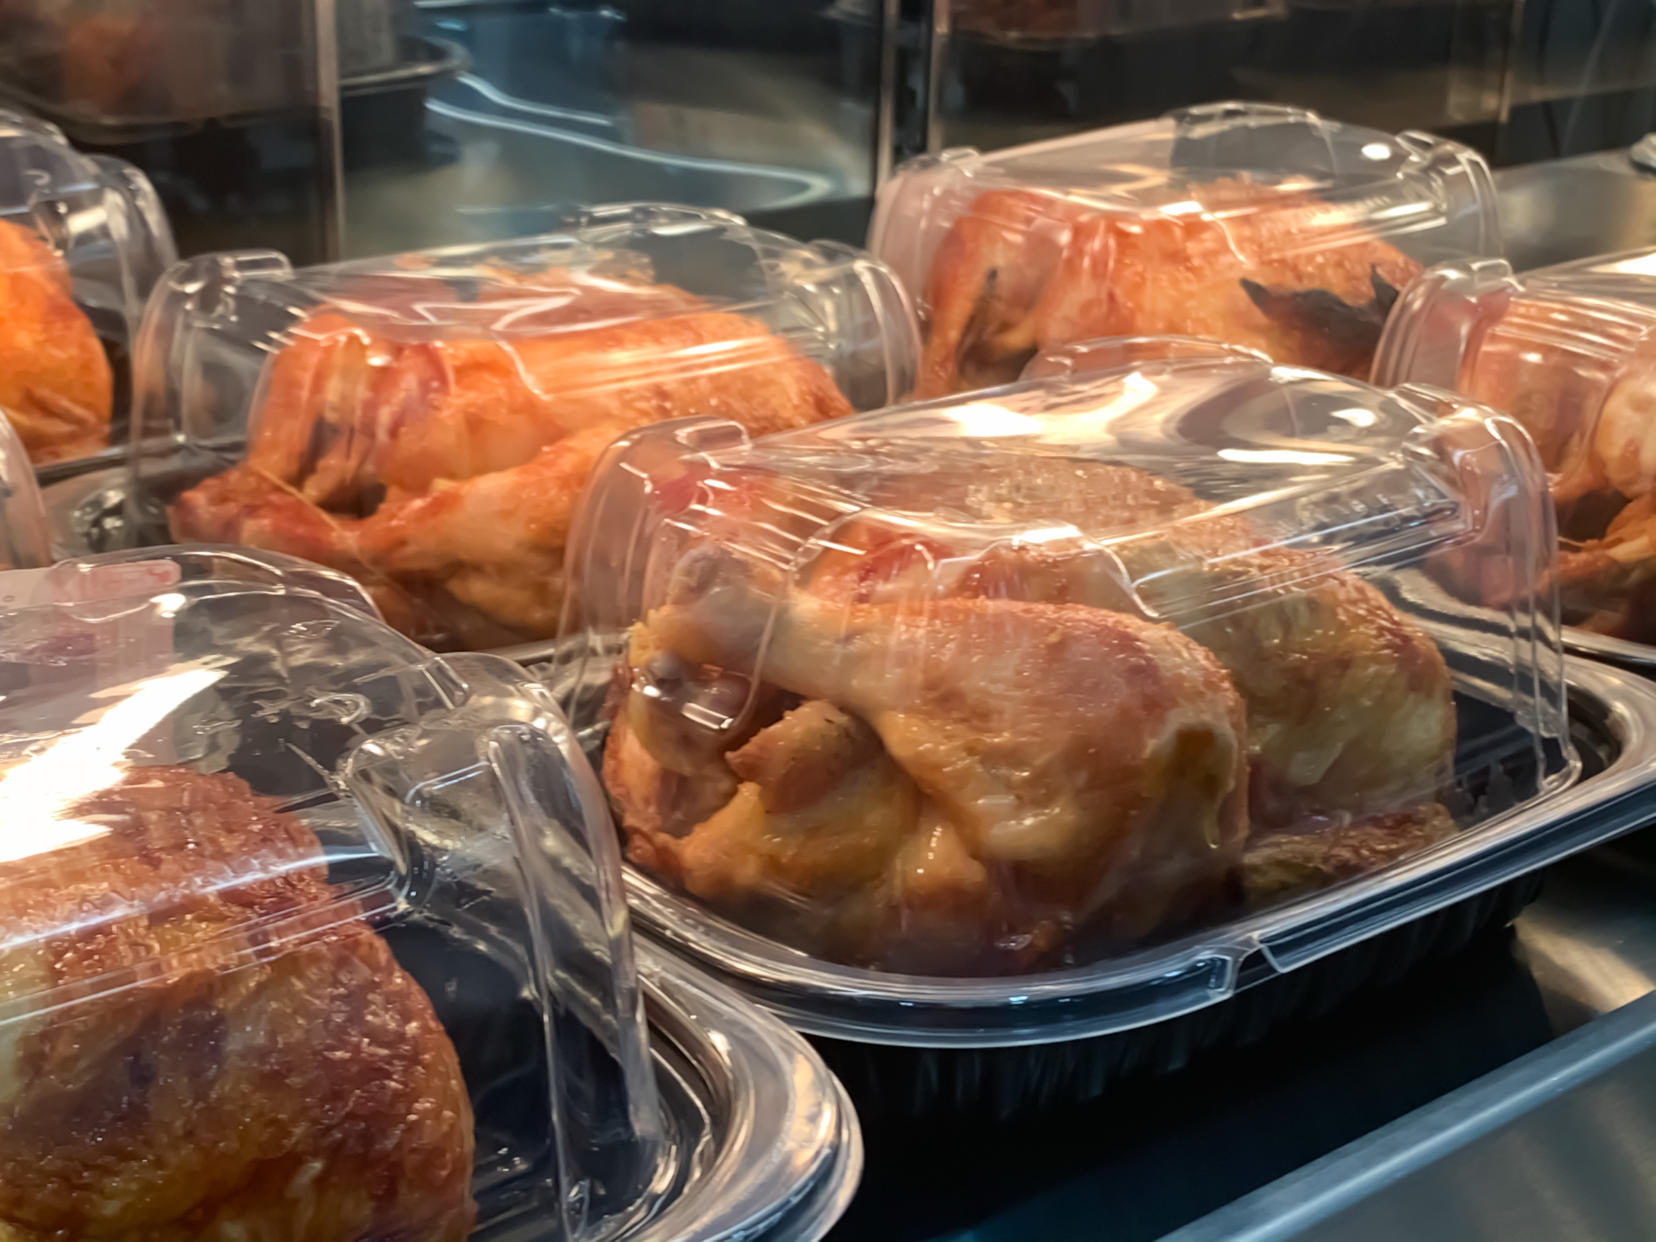 Packed roast chicken place on the shelf waiting to sale in the market deli section. It could cause food poisoning. 